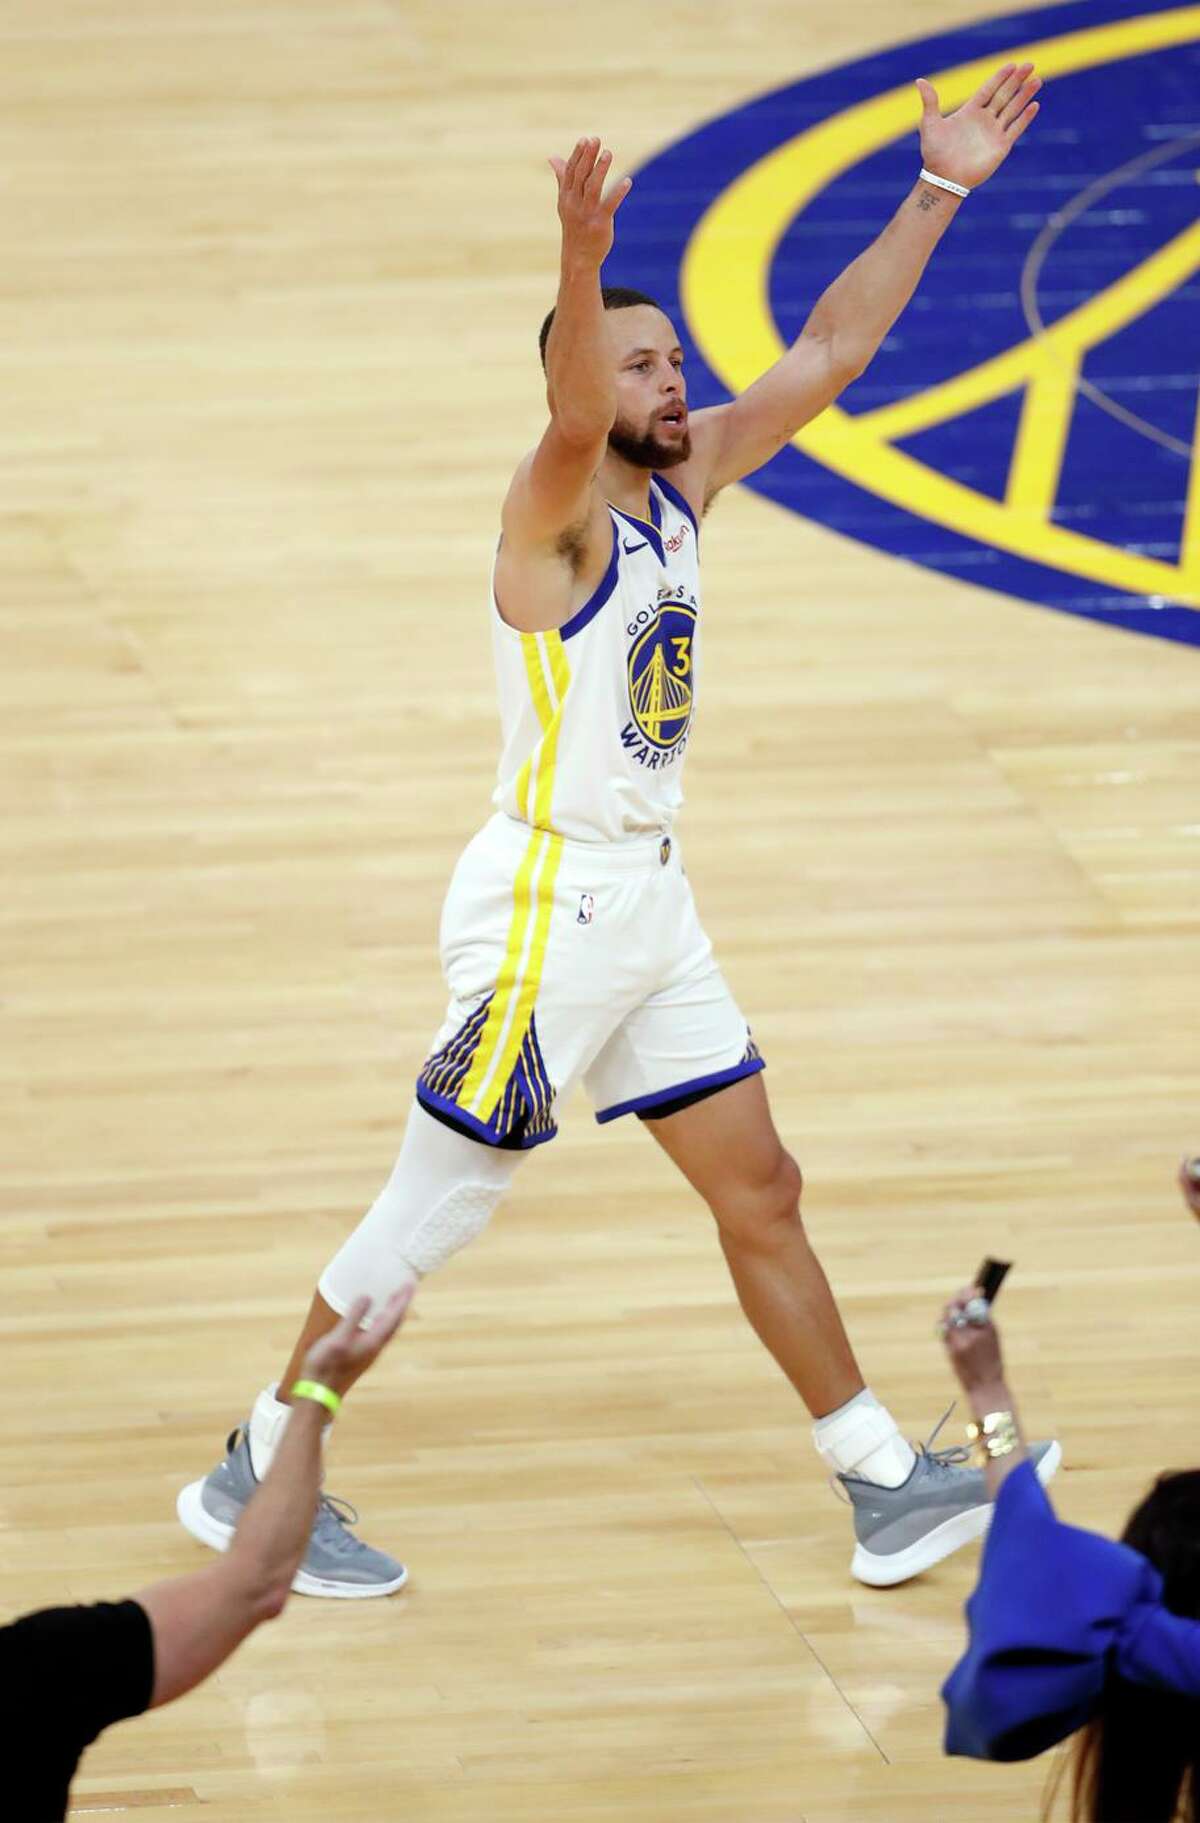 Golden State Warriors' Stephen Curry celebrates a fourth quarter 3-pointer during 113-101 win over Memphis Grizzlies in NBA game at Chase Center in San Francisco, Calif., on Sunday, May 16, 2021.